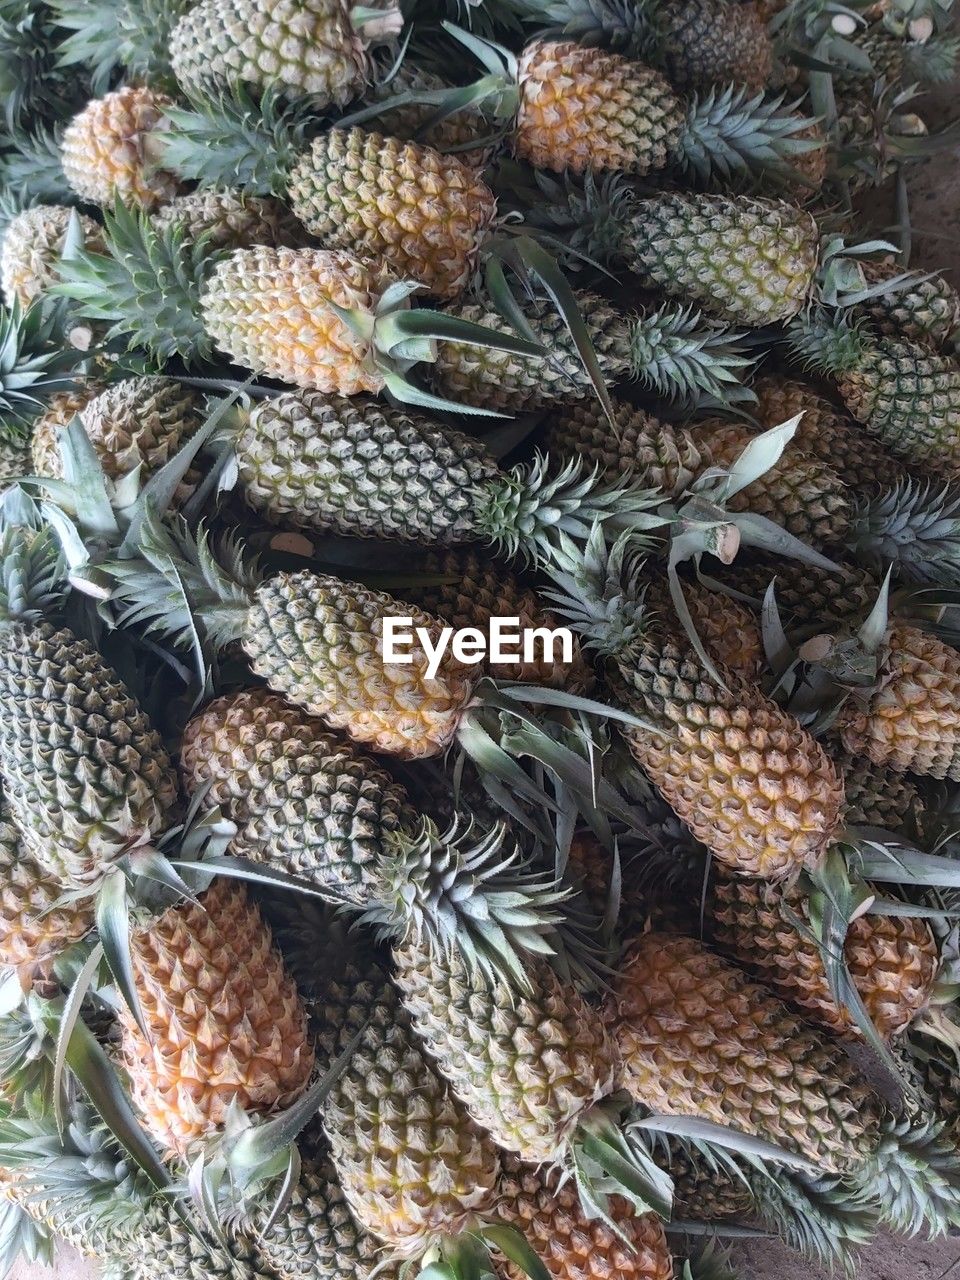 pineapple, food and drink, food, no people, conifer cone, plant, ananas, large group of objects, healthy eating, produce, high angle view, freshness, day, wellbeing, full frame, abundance, backgrounds, fruit, for sale, market, retail, nature, outdoors, tropical fruit, cactus, succulent plant, close-up